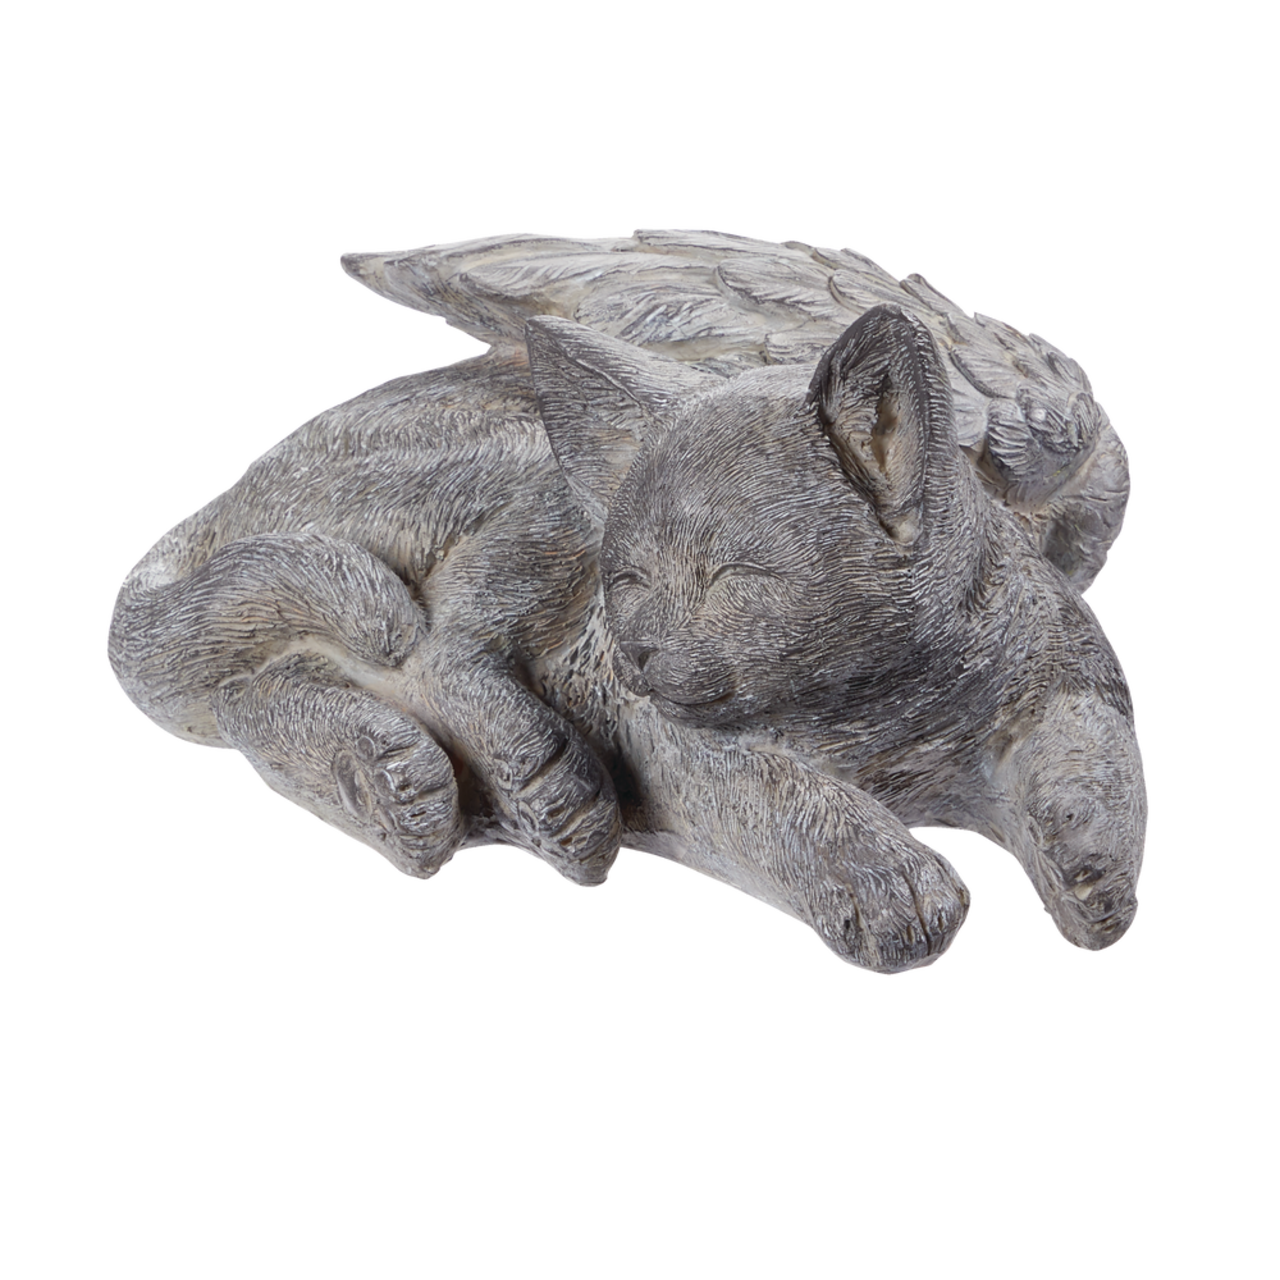 https://media-www.canadiantire.ca/product/seasonal-gardening/backyard-living/outdoor-living-accessories/0597362/for-living-cat-memorial-statue-5a7e510c-5329-4dc0-bccd-9c0d76a8febe.png?imdensity=1&imwidth=640&impolicy=mZoom